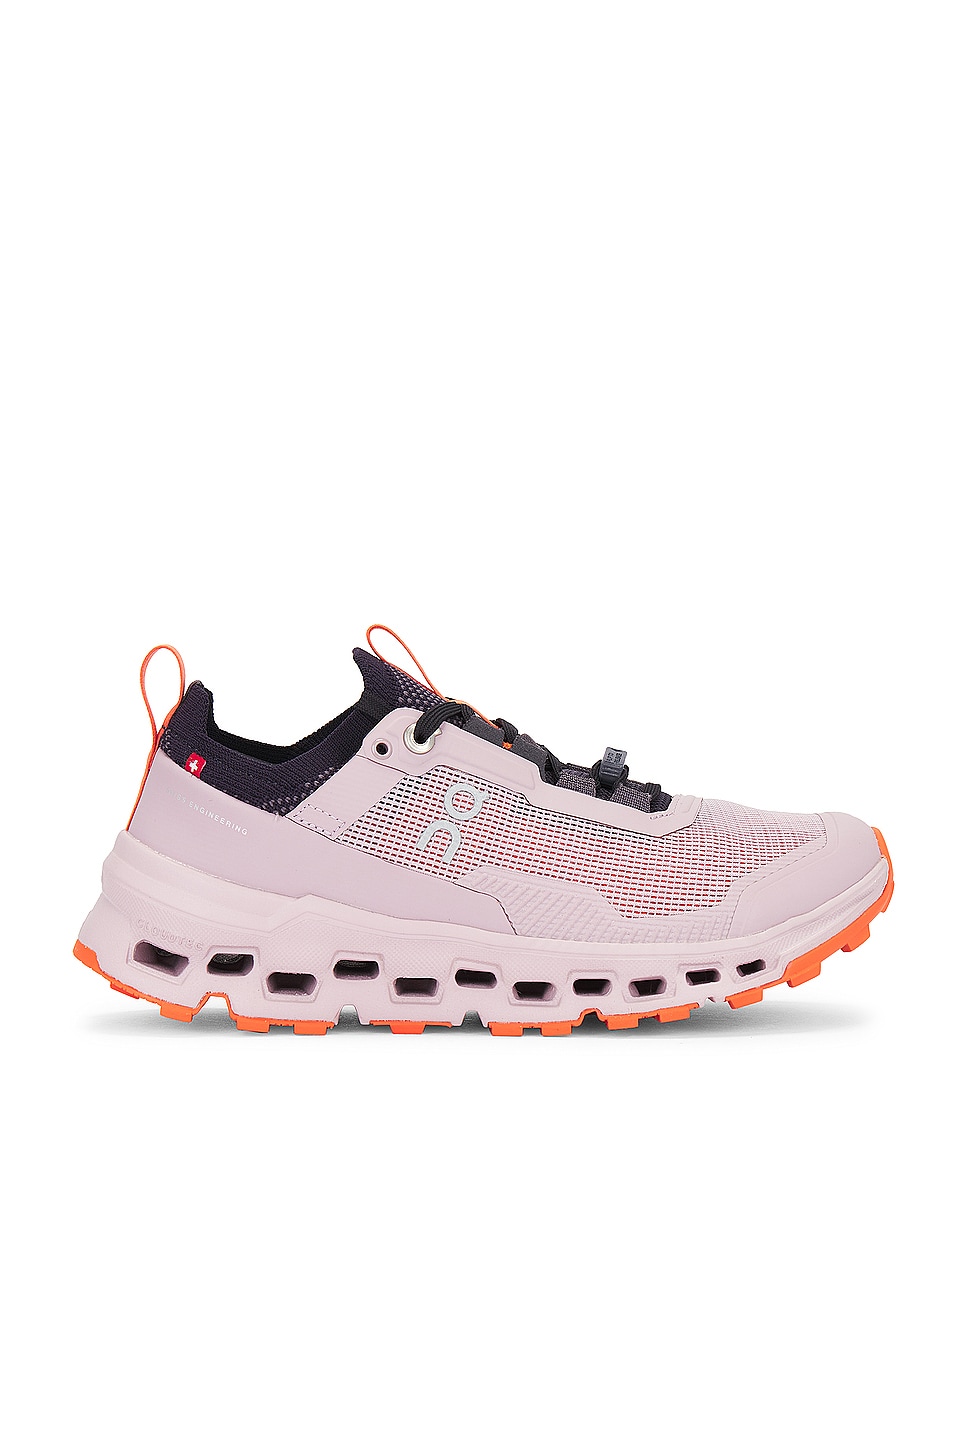 Image 1 of On Cloudultra 2 Sneaker in Mauve & Flame